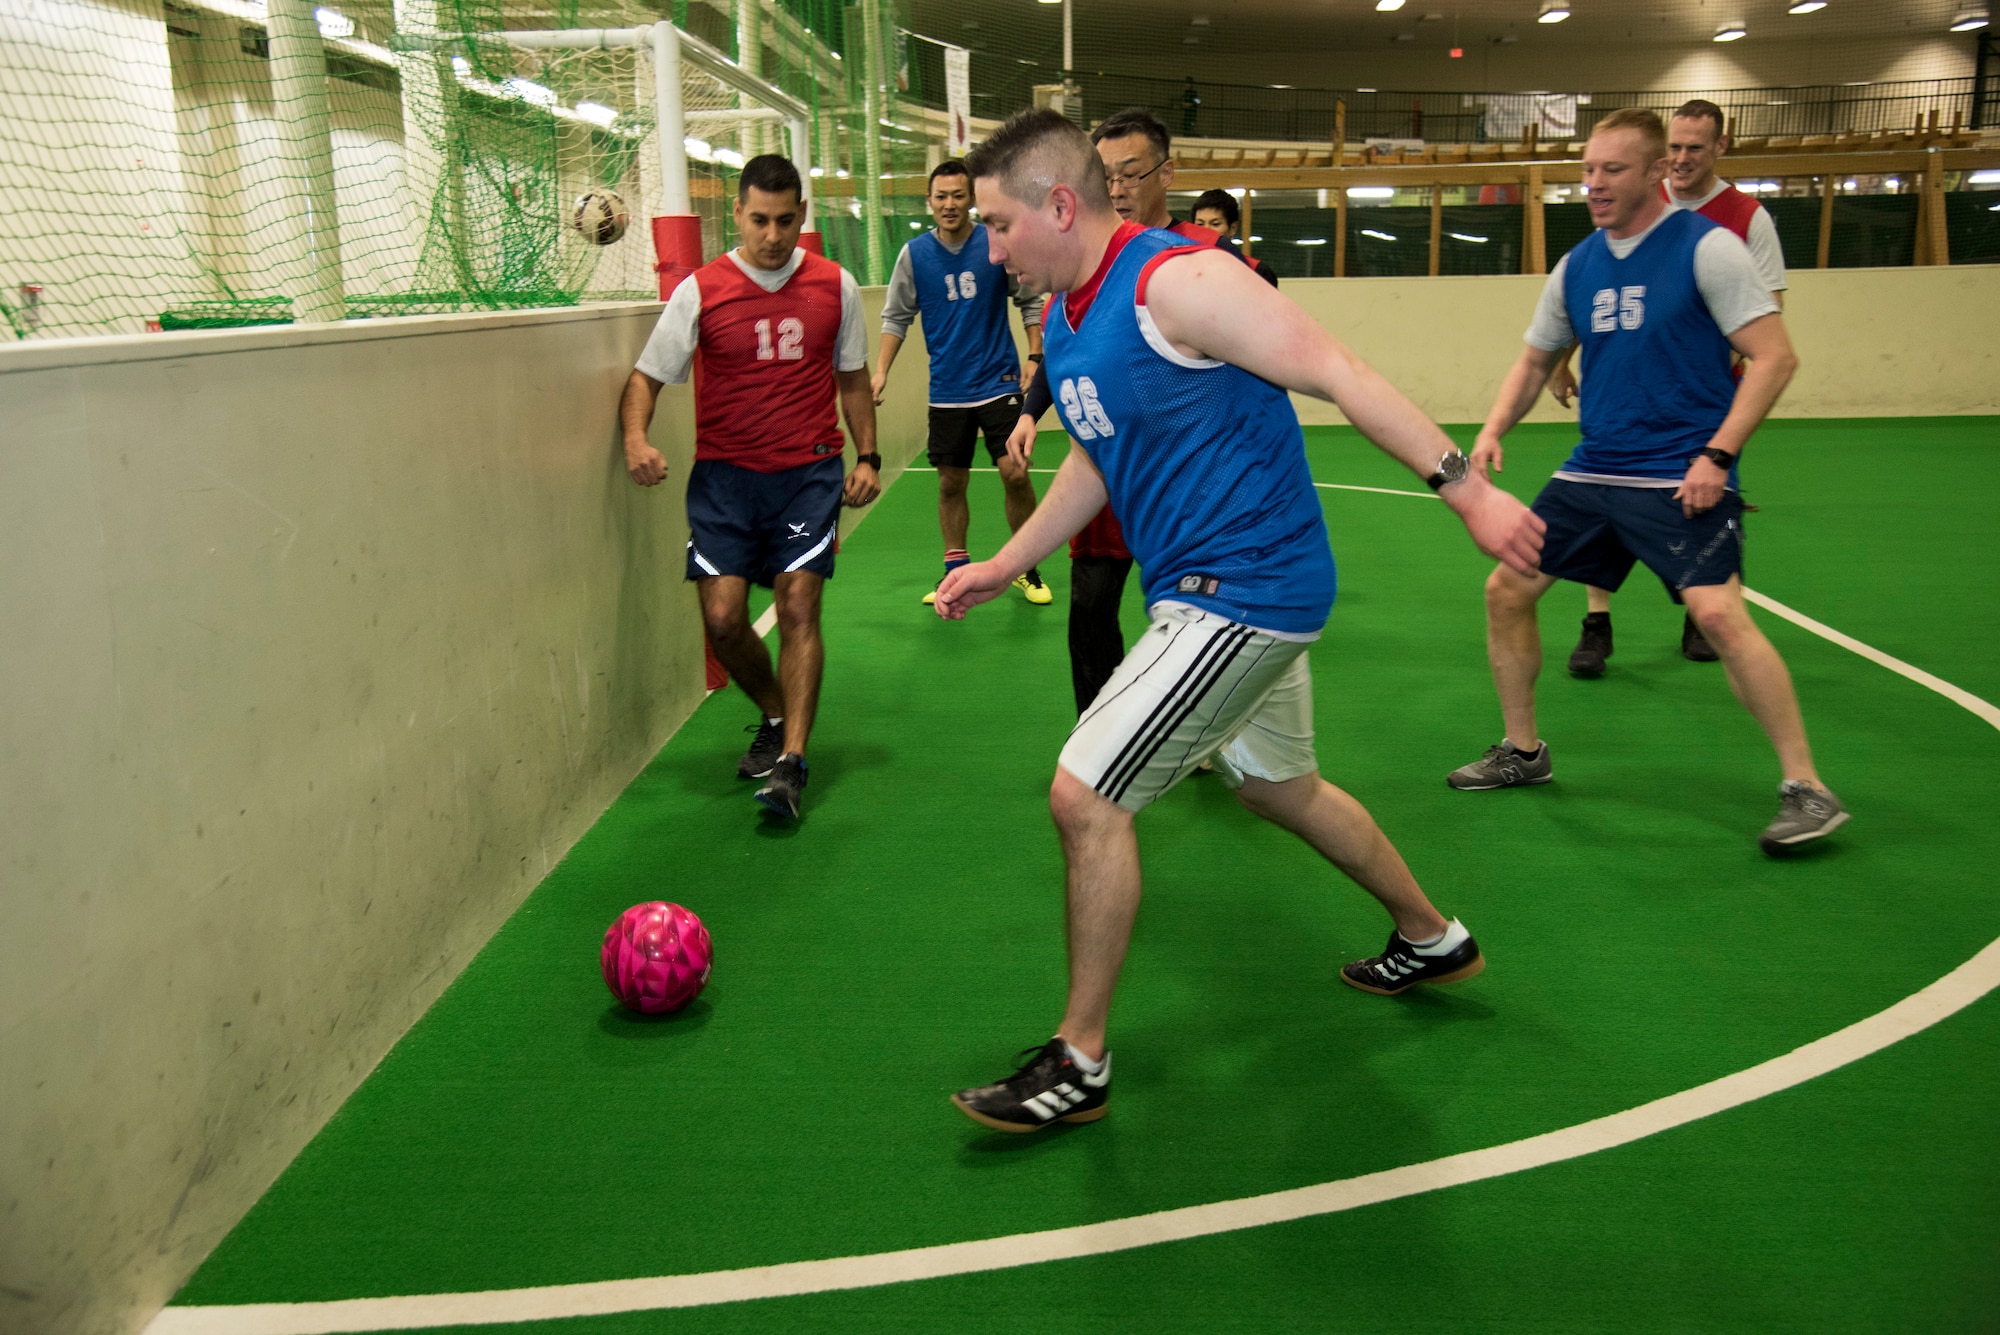 American and Japanese security forces members run for a ball in a bilateral soccer game at Misawa Air Base, Japan, March 15, 2019.  This sporting event provided a way for both squadrons to connect and team build, which is crucial for the U.S.-Japan alliance. (U.S. Air Force photo by Branden Yamada)